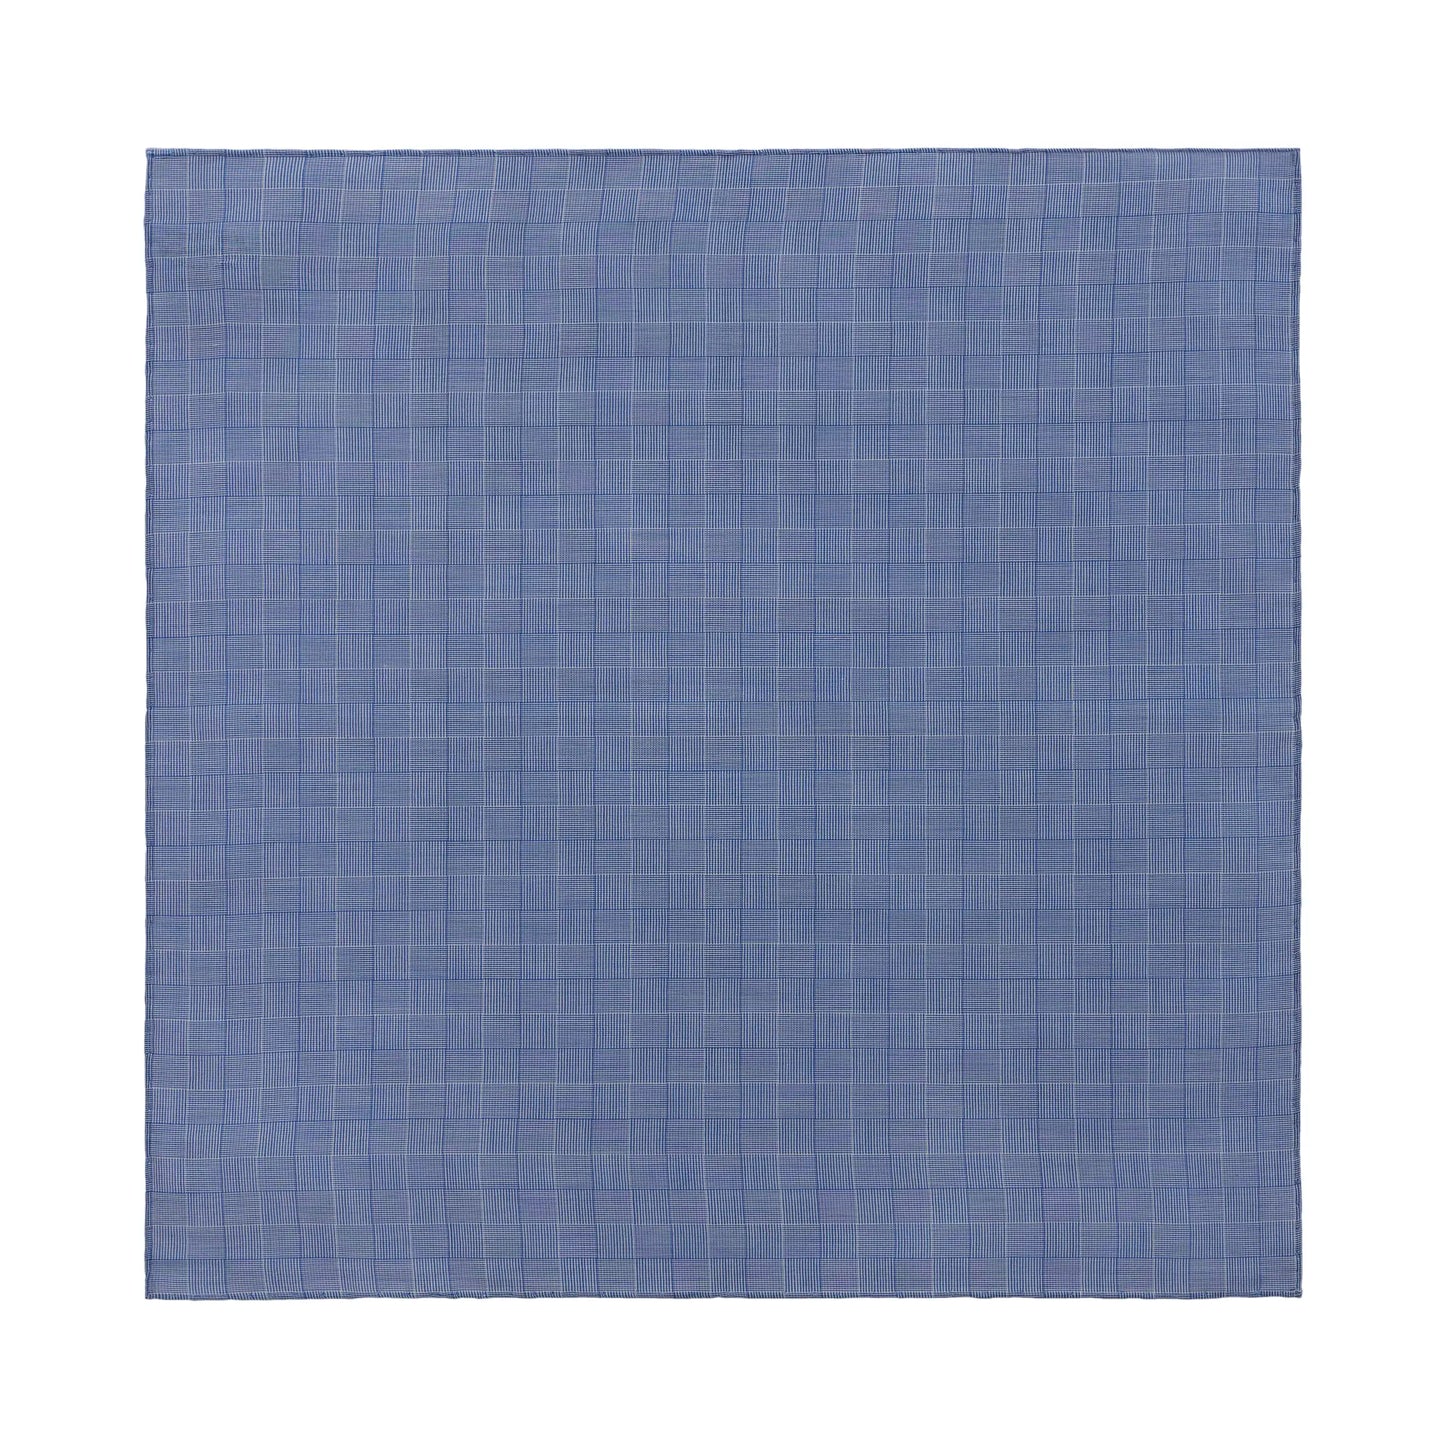 Checked Cotton Pocket Square in Blue